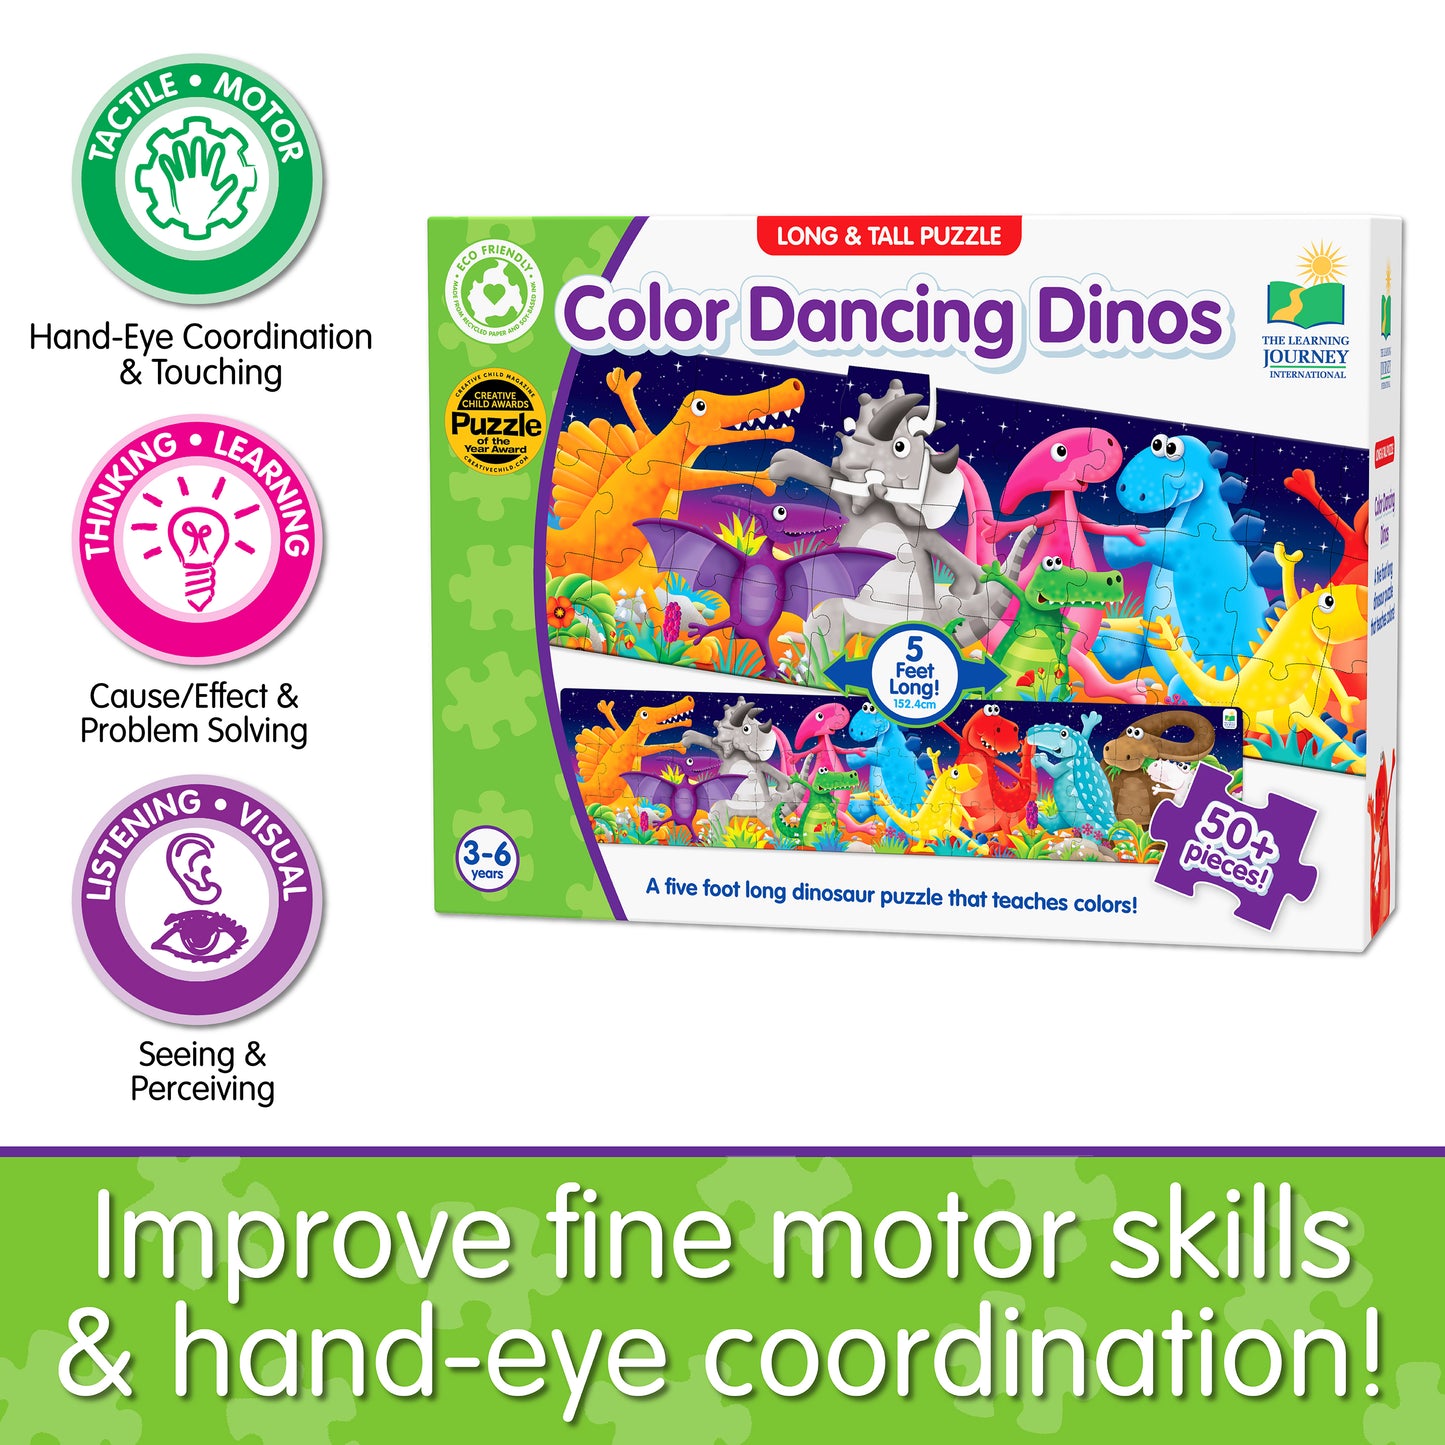 Infographic about Long and Tall Color Dancing Dinos Puzzle's educational benefits that says, "Improve fine motor skills and hand-eye coordination!"